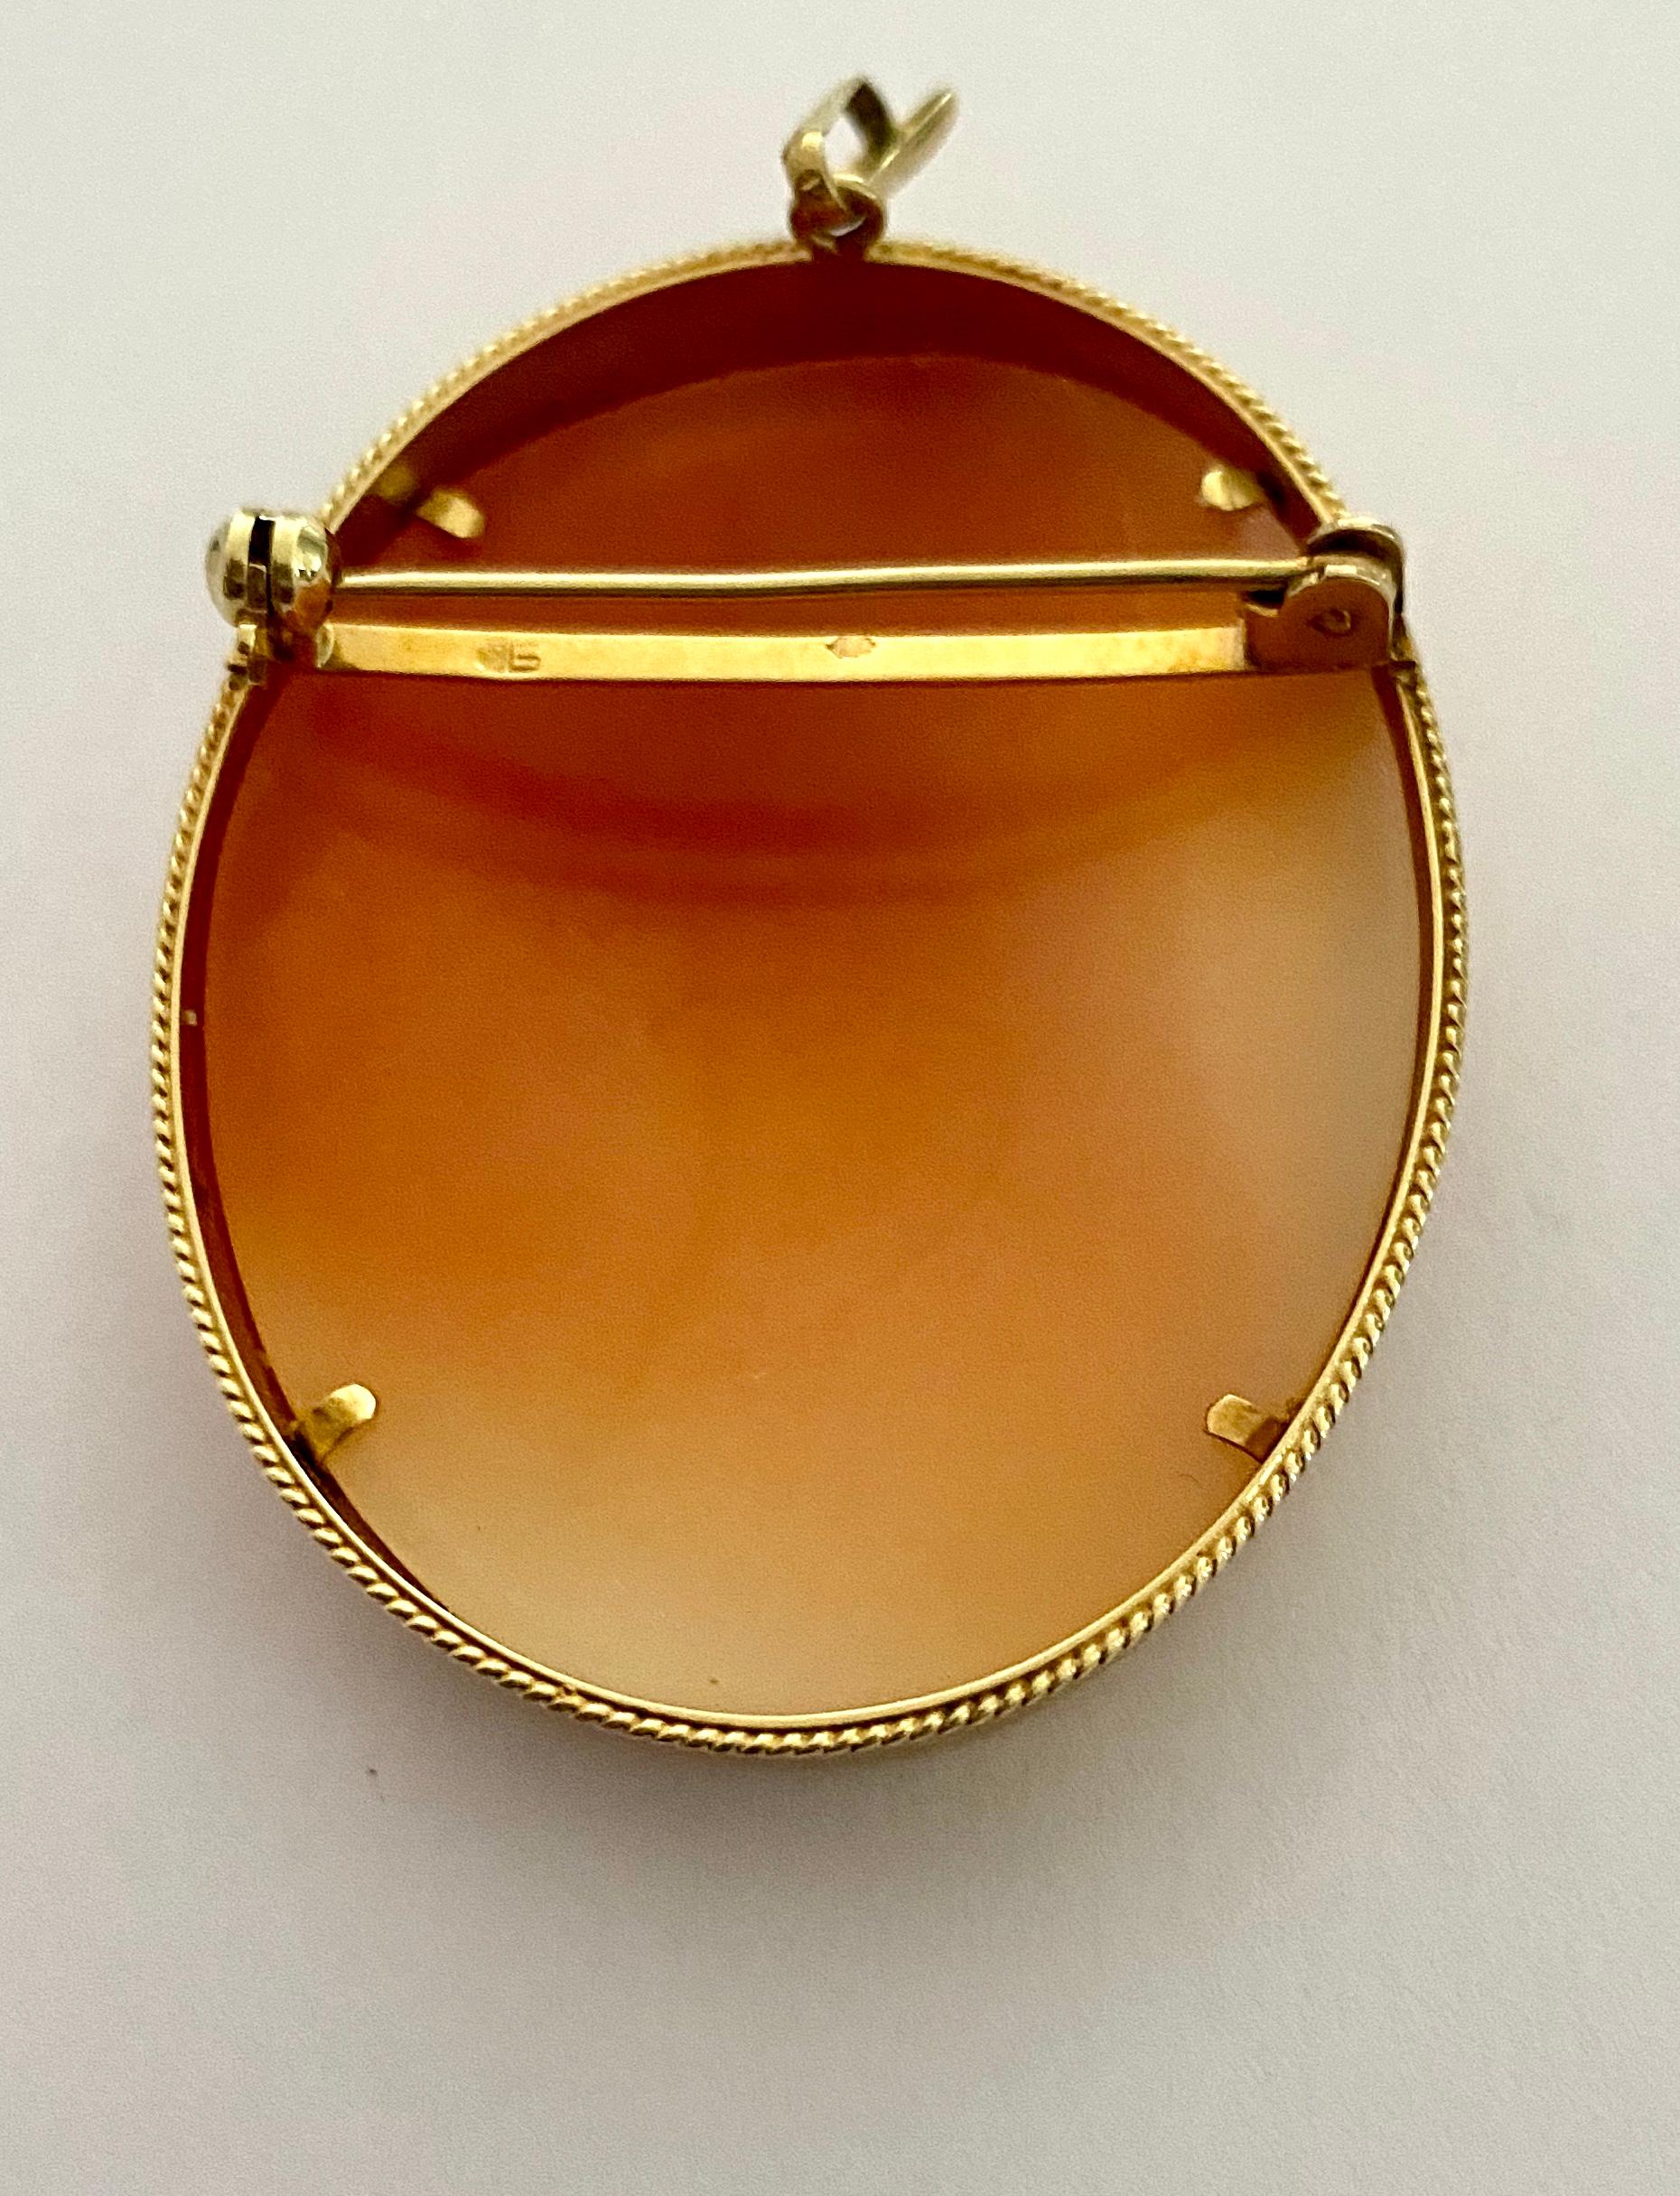 Uncut 14K Yellow Gold Pendant/Brooch with Natural Mother of Pearl, Netherlands, 1960